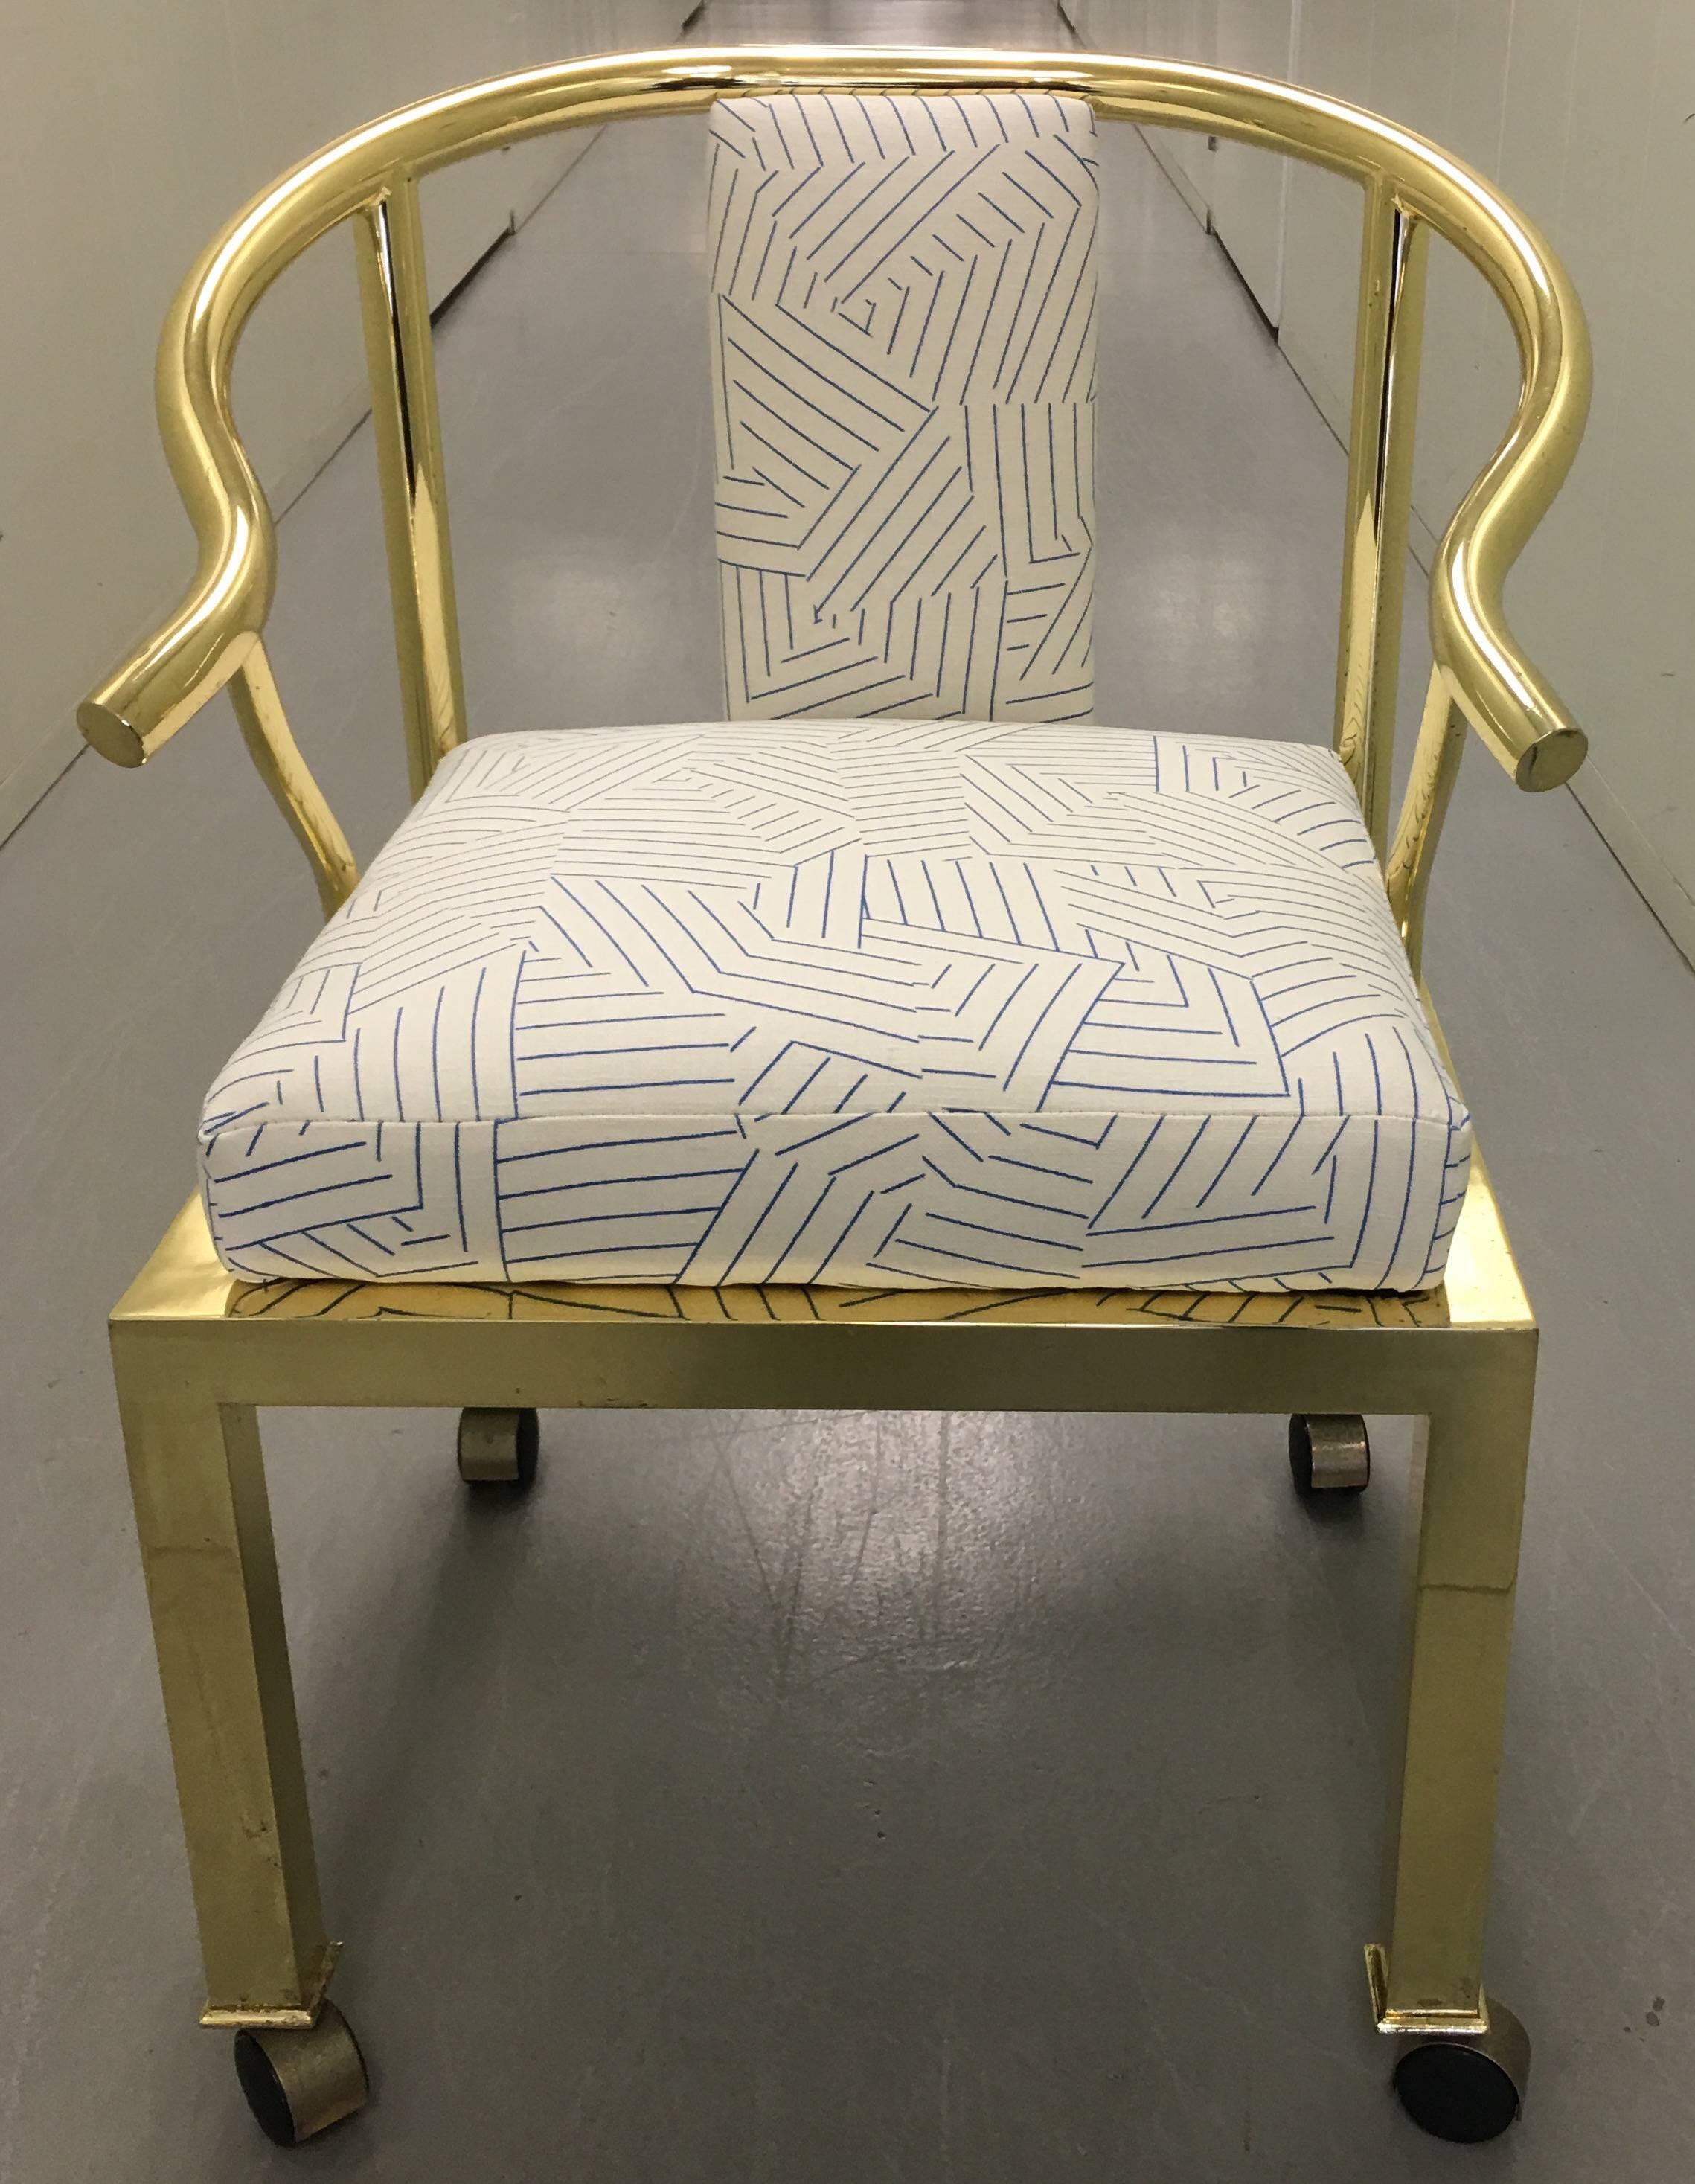 1970s polished brass horseshoe armchair by DIA- Design Institute of America. Newly upholstered in Miles Redd for Schumacher 'Deconstructed Stripe' in cobalt (blue or white) linen.